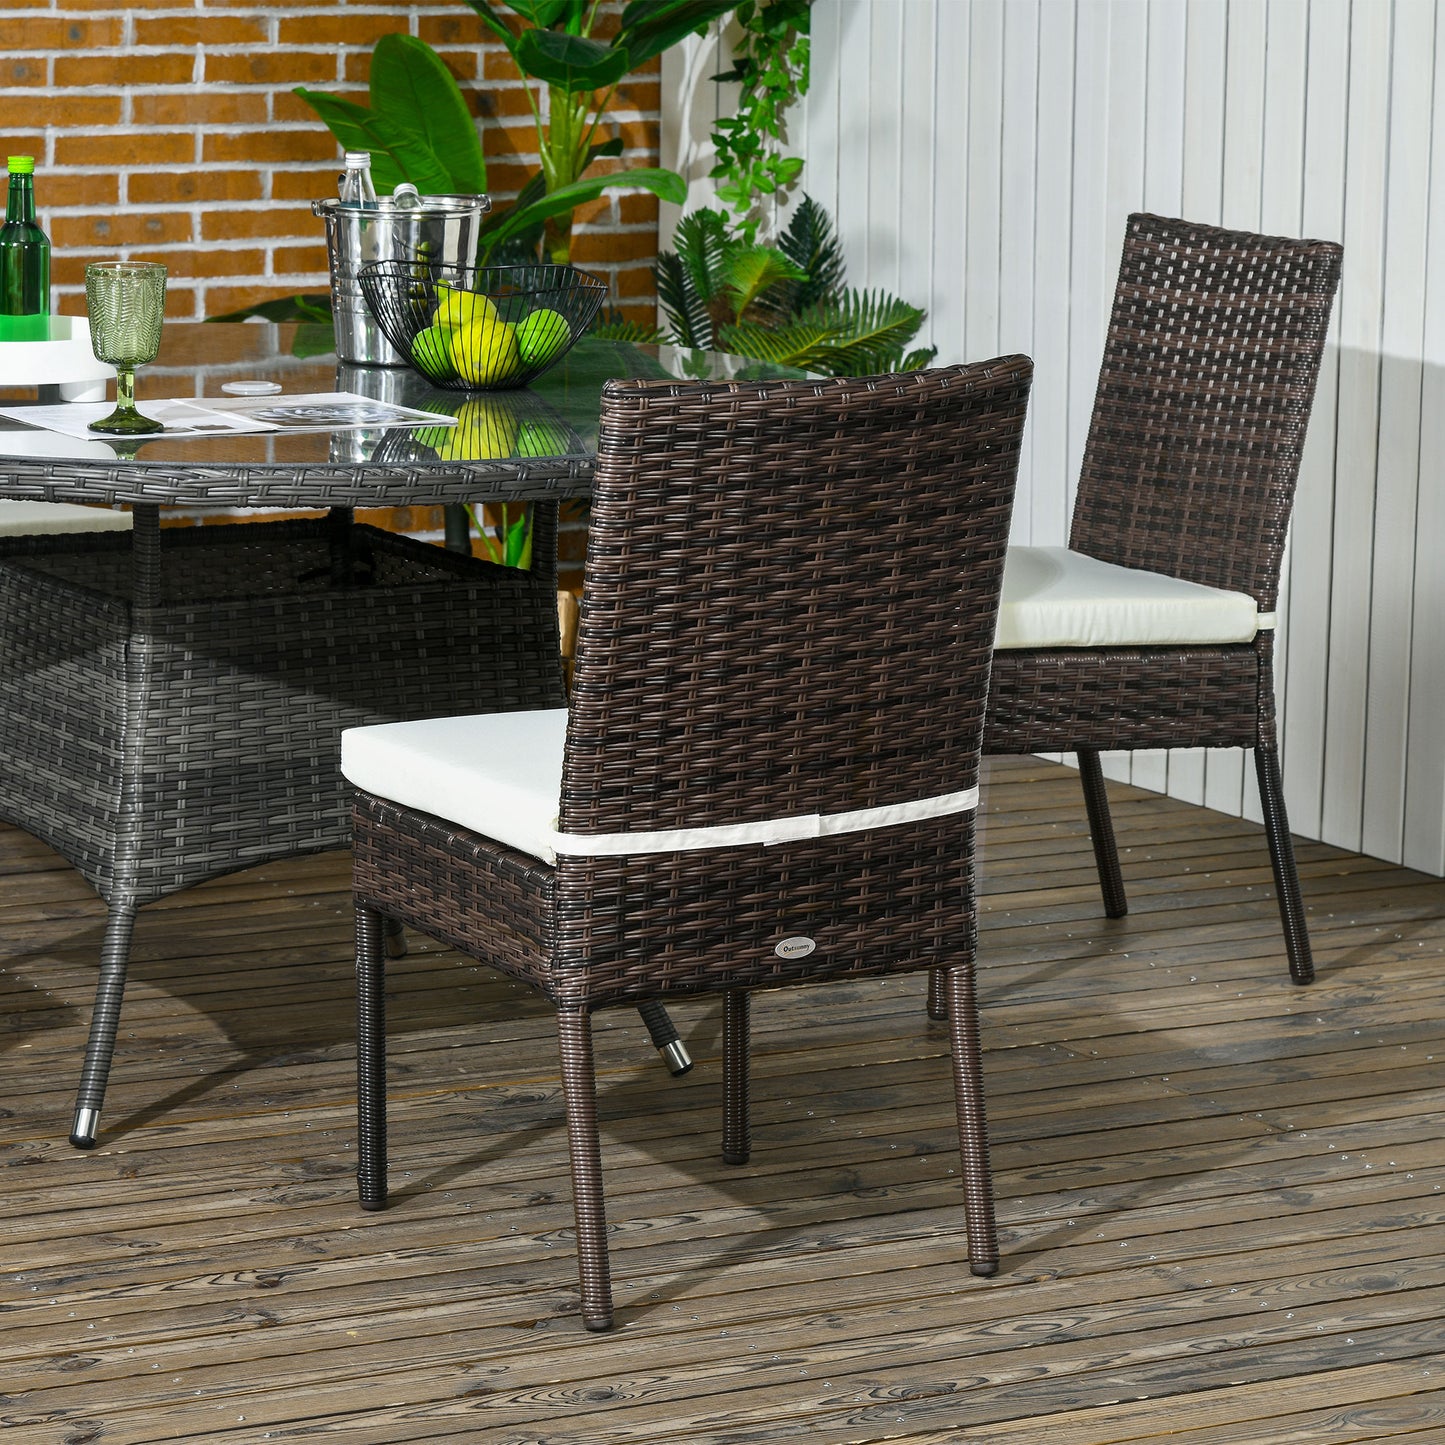 Outsunny Set of Four Armless Rattan Garden Chairs - Brown